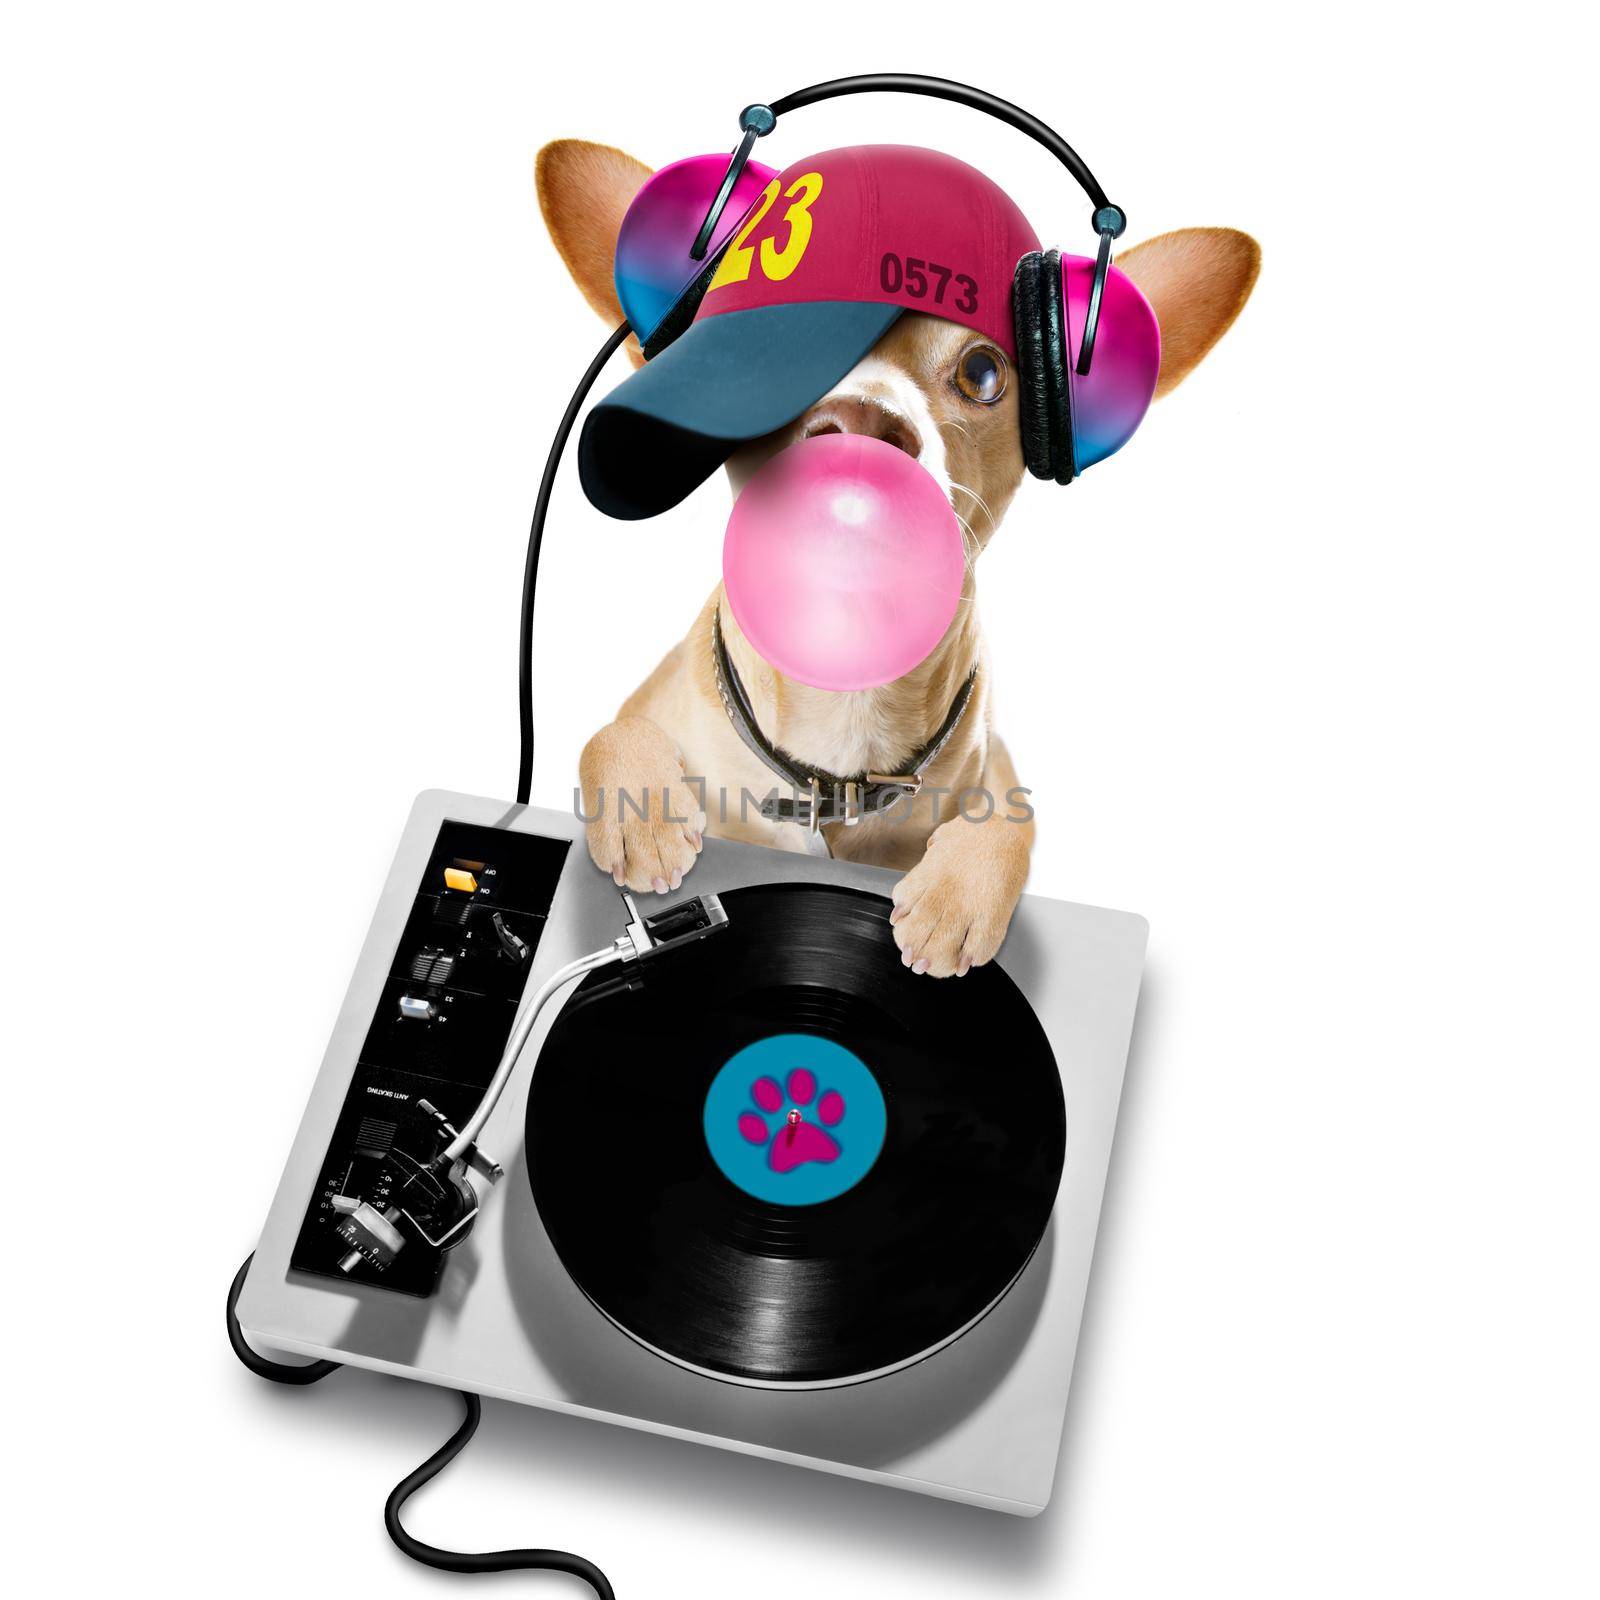 chihuahua  dog playing music in a club with disco ball , isolated on white background, with vinyl record